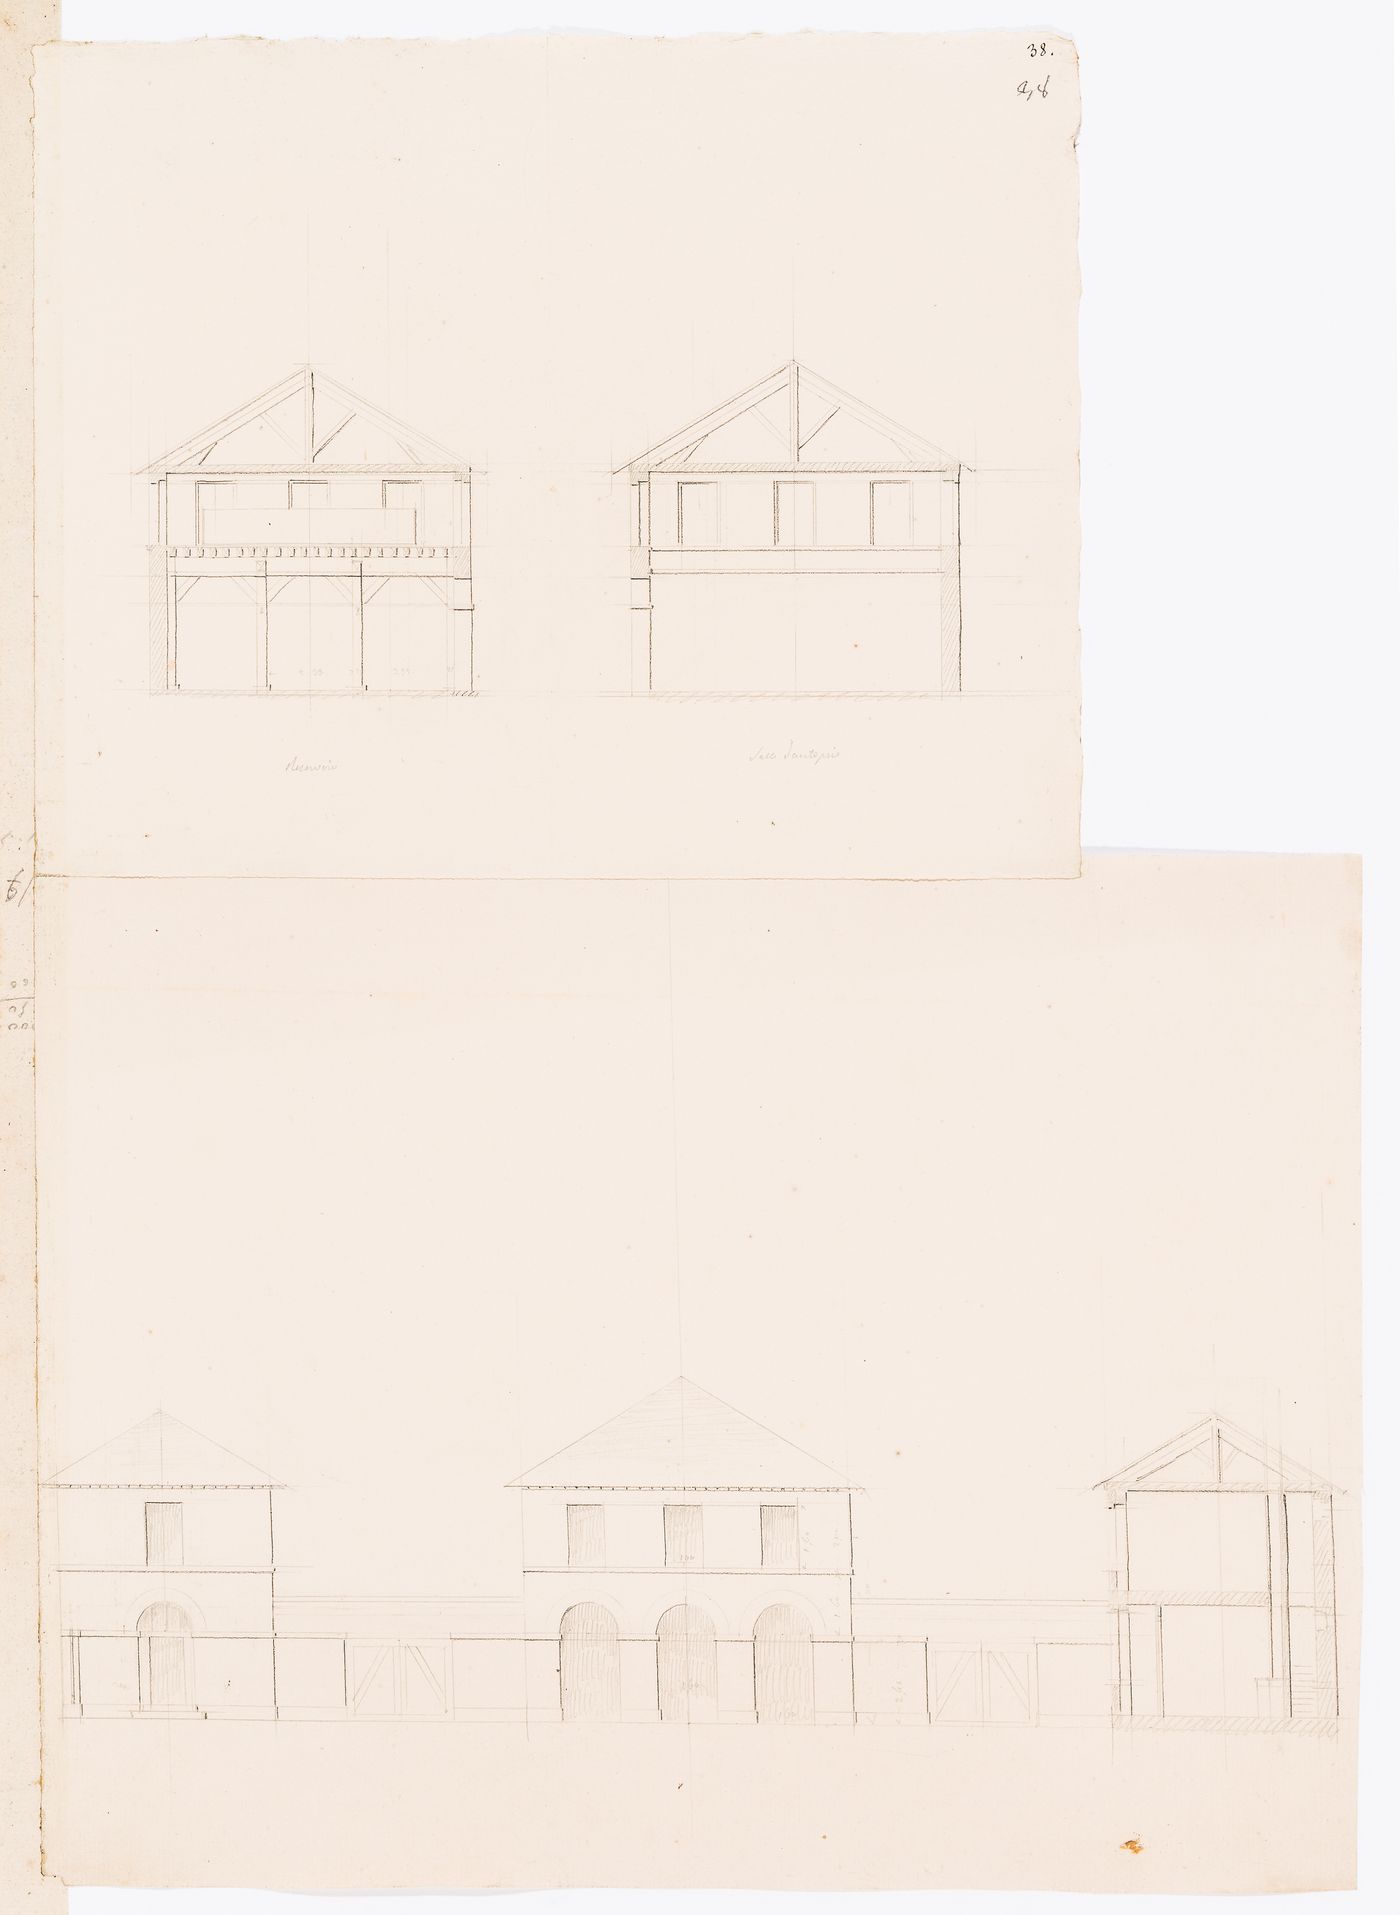 Project for a horse slaughterhouse, Plaine de Grenelle: Elevations and cross section for three unidentified interconnected buildings